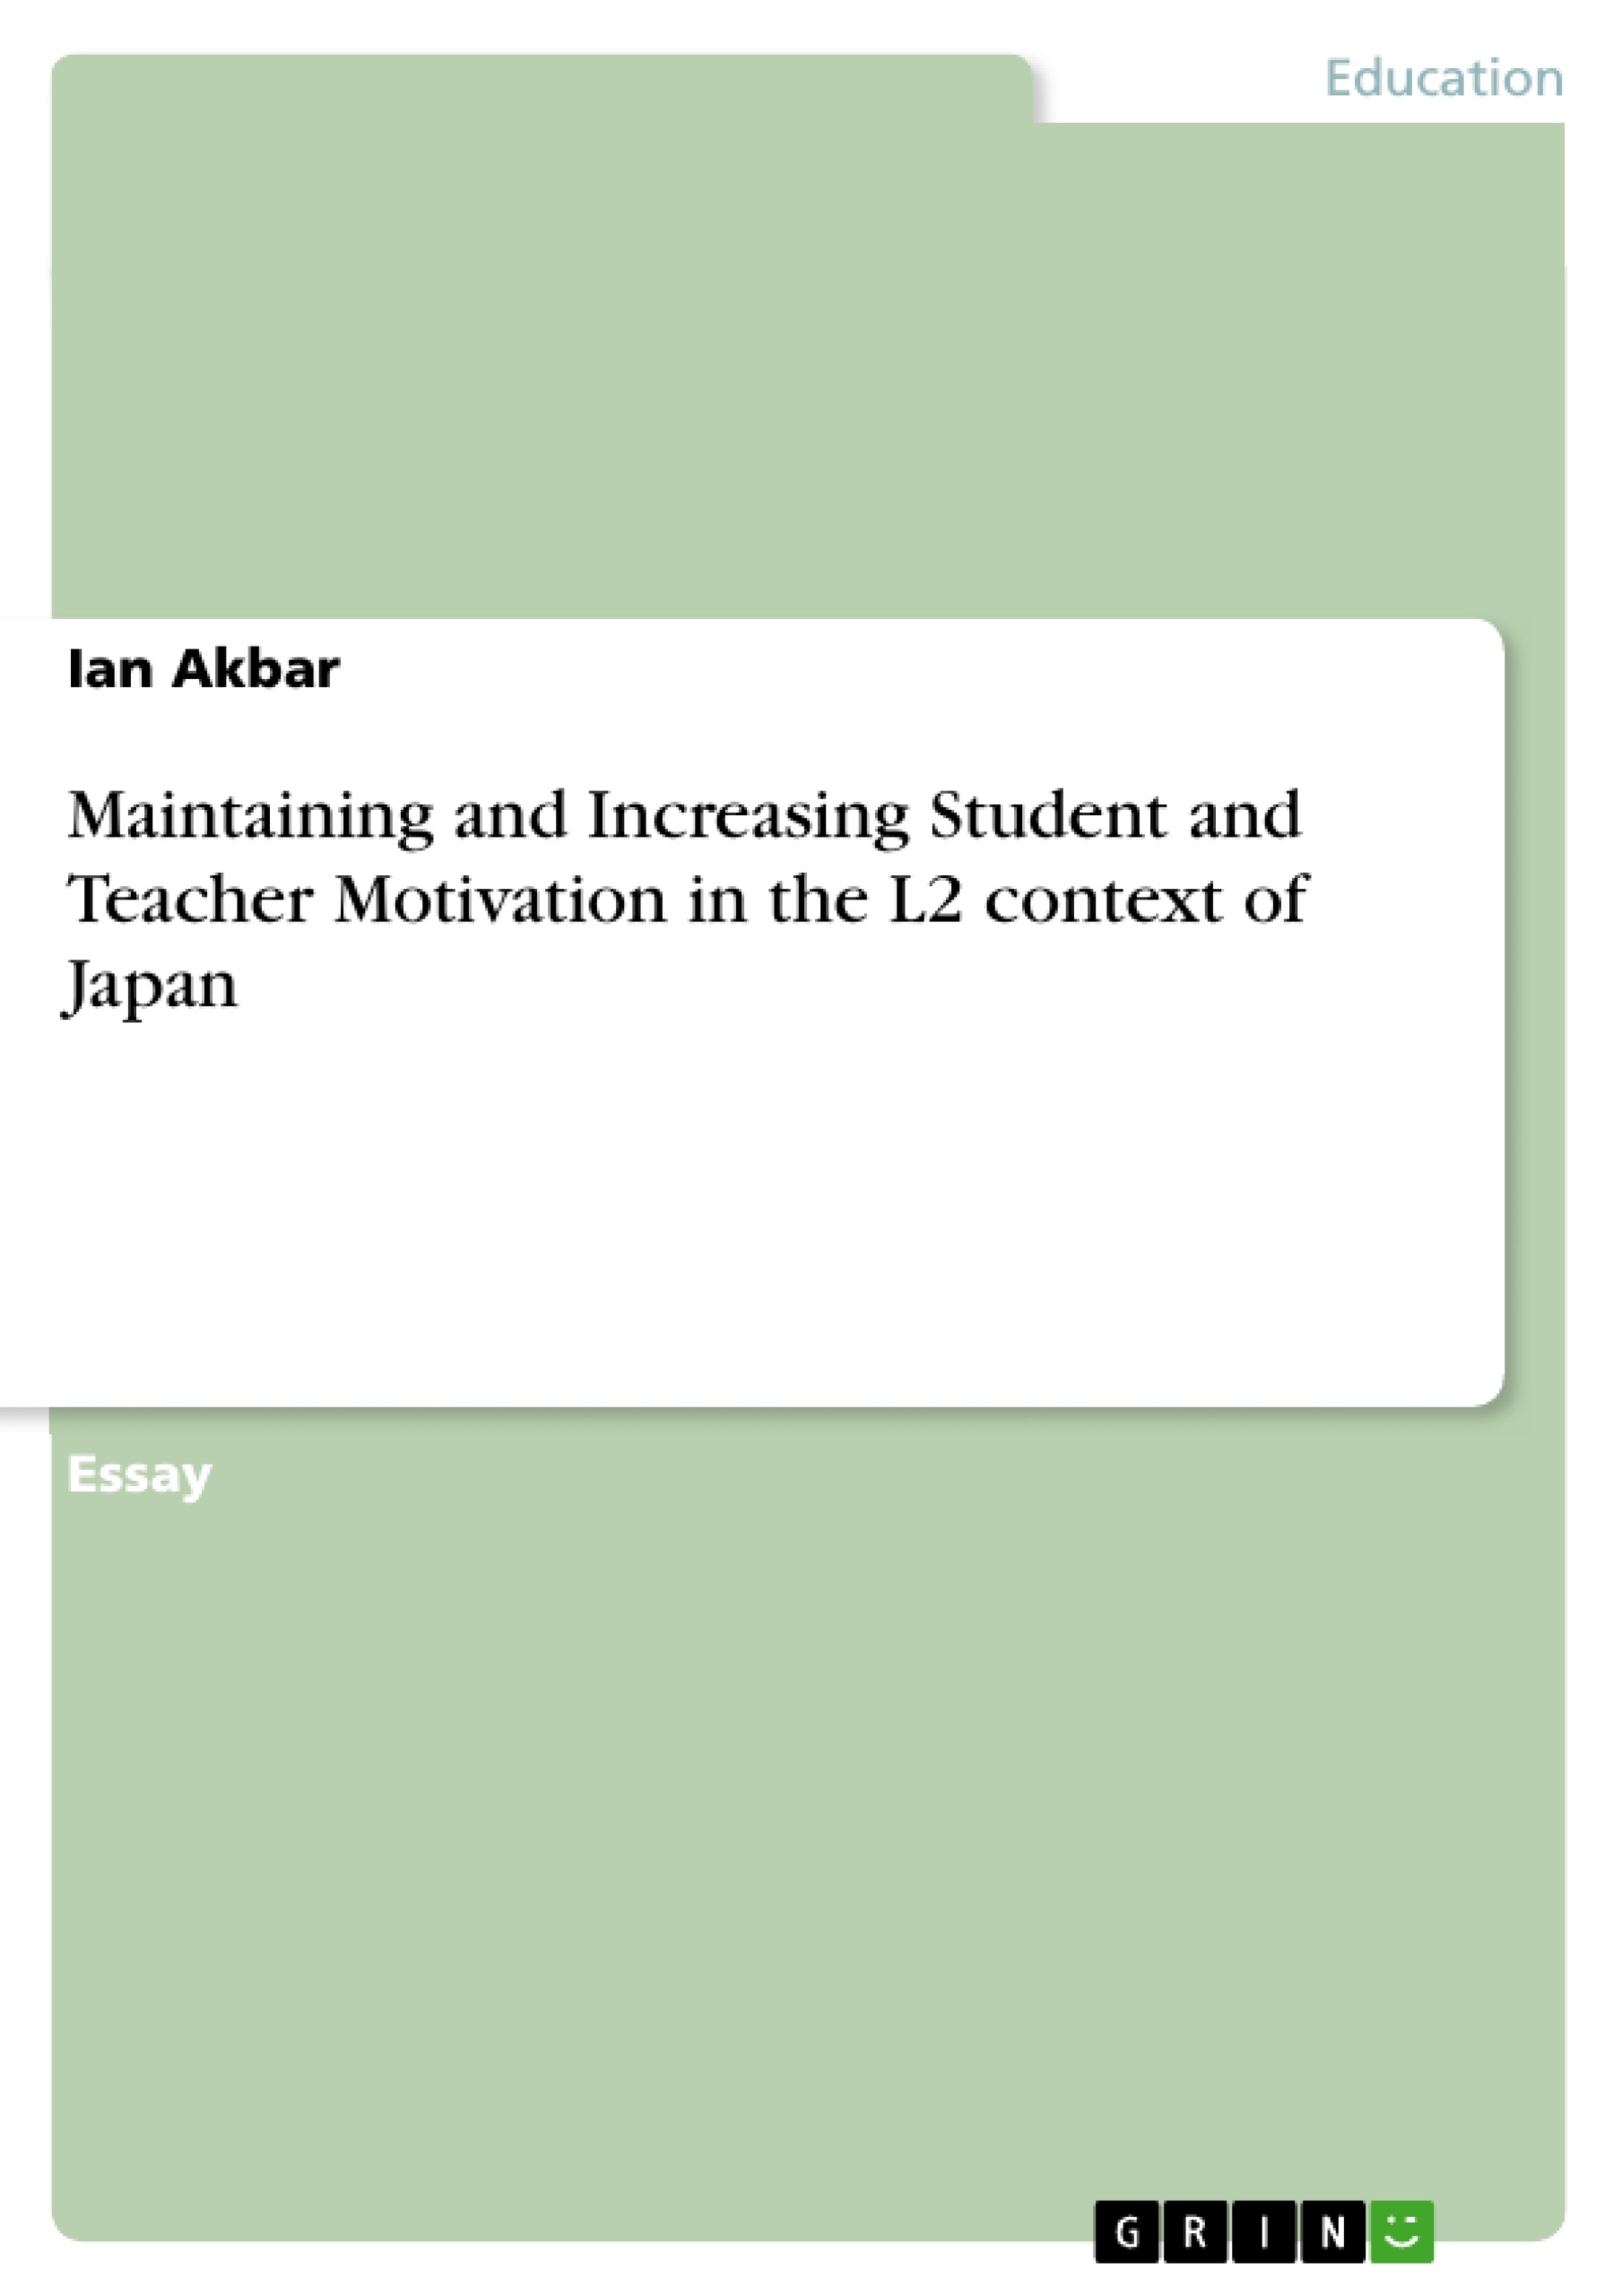 Title: Maintaining and Increasing Student and Teacher Motivation in the L2 context of Japan